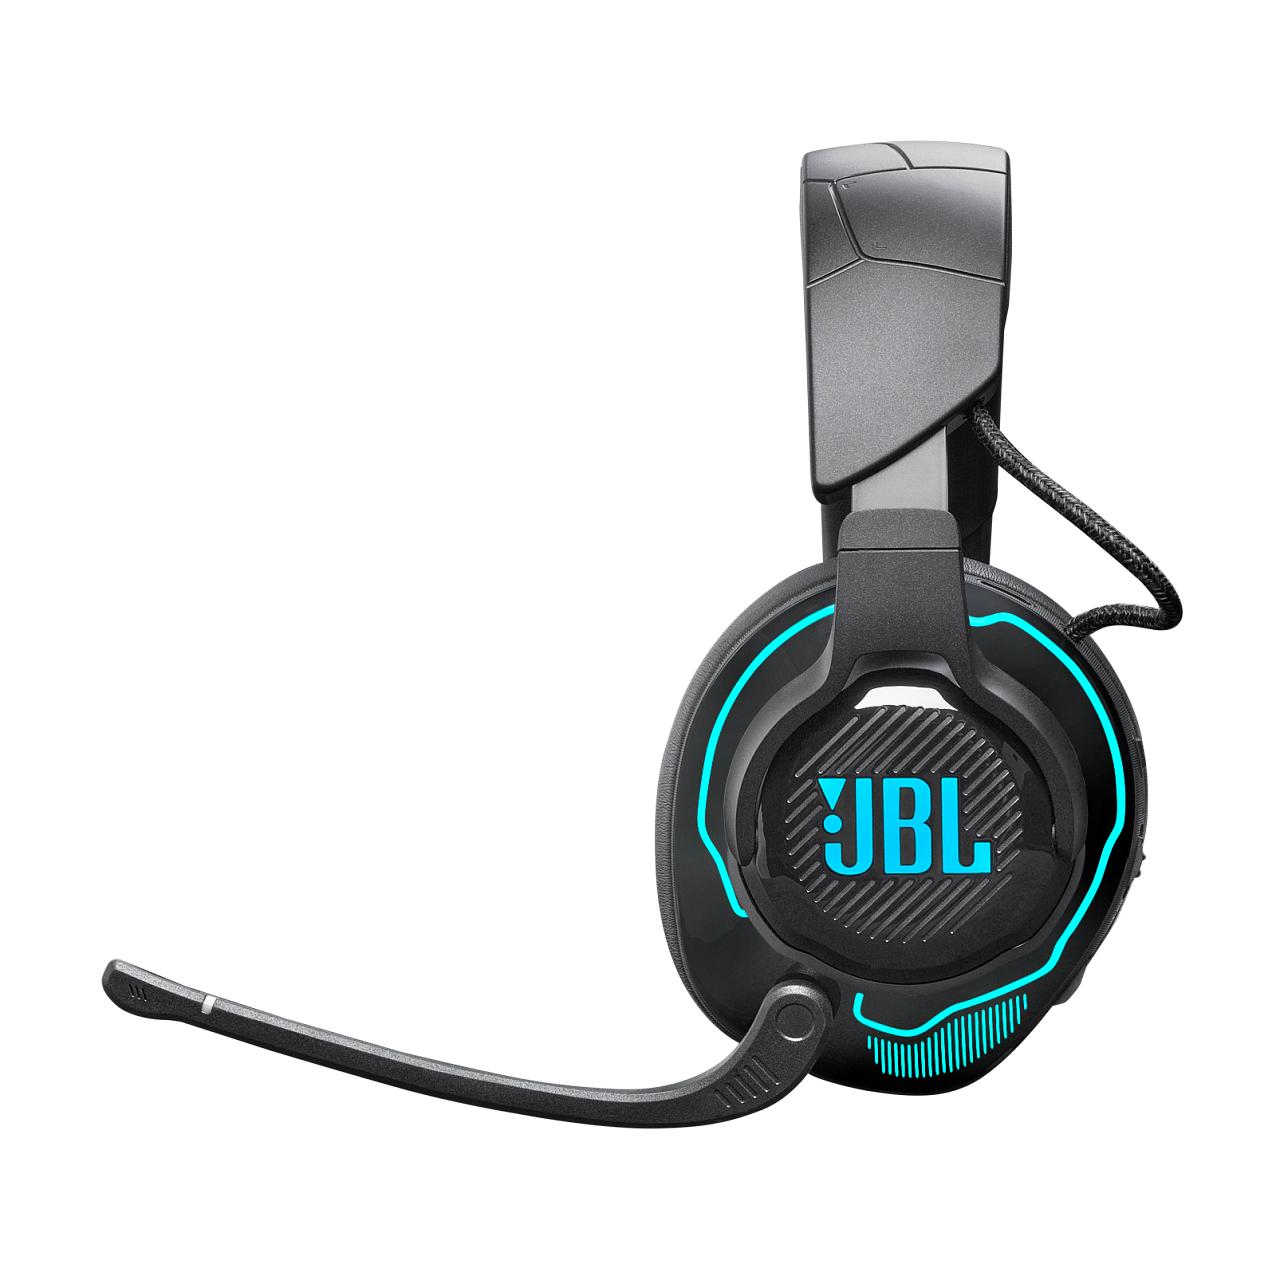 Switch PS4/PS5, Gaming Headset PC, Handy, Headset 910 Over-ear XBOX, JBL Quantum und Black Bluetooth für